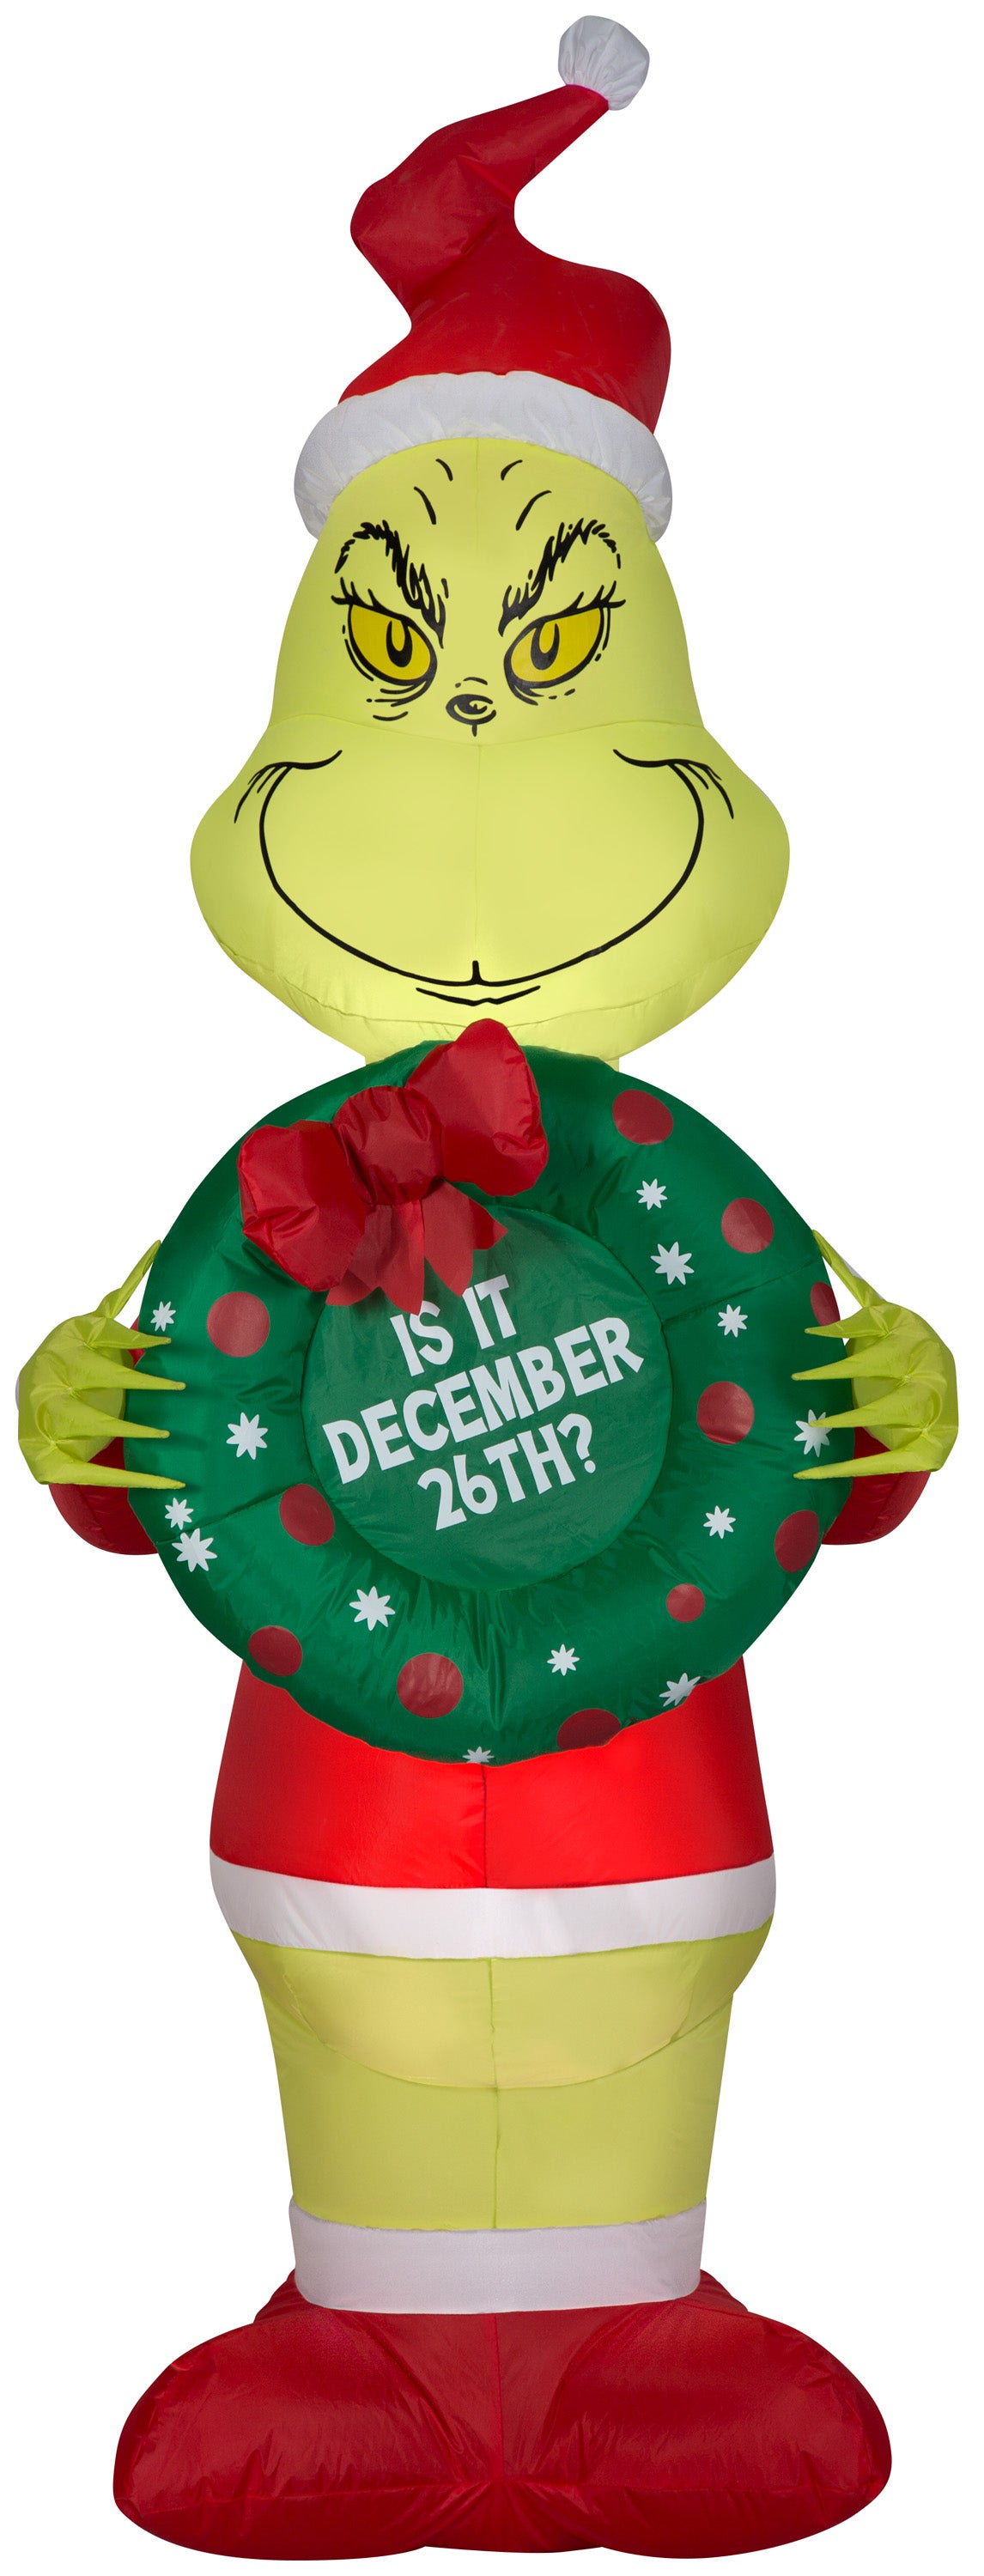 Gemmy Christmas Airblown Inflatable Inflatable Grinch with Wreath, 5.5 ft Tall, green